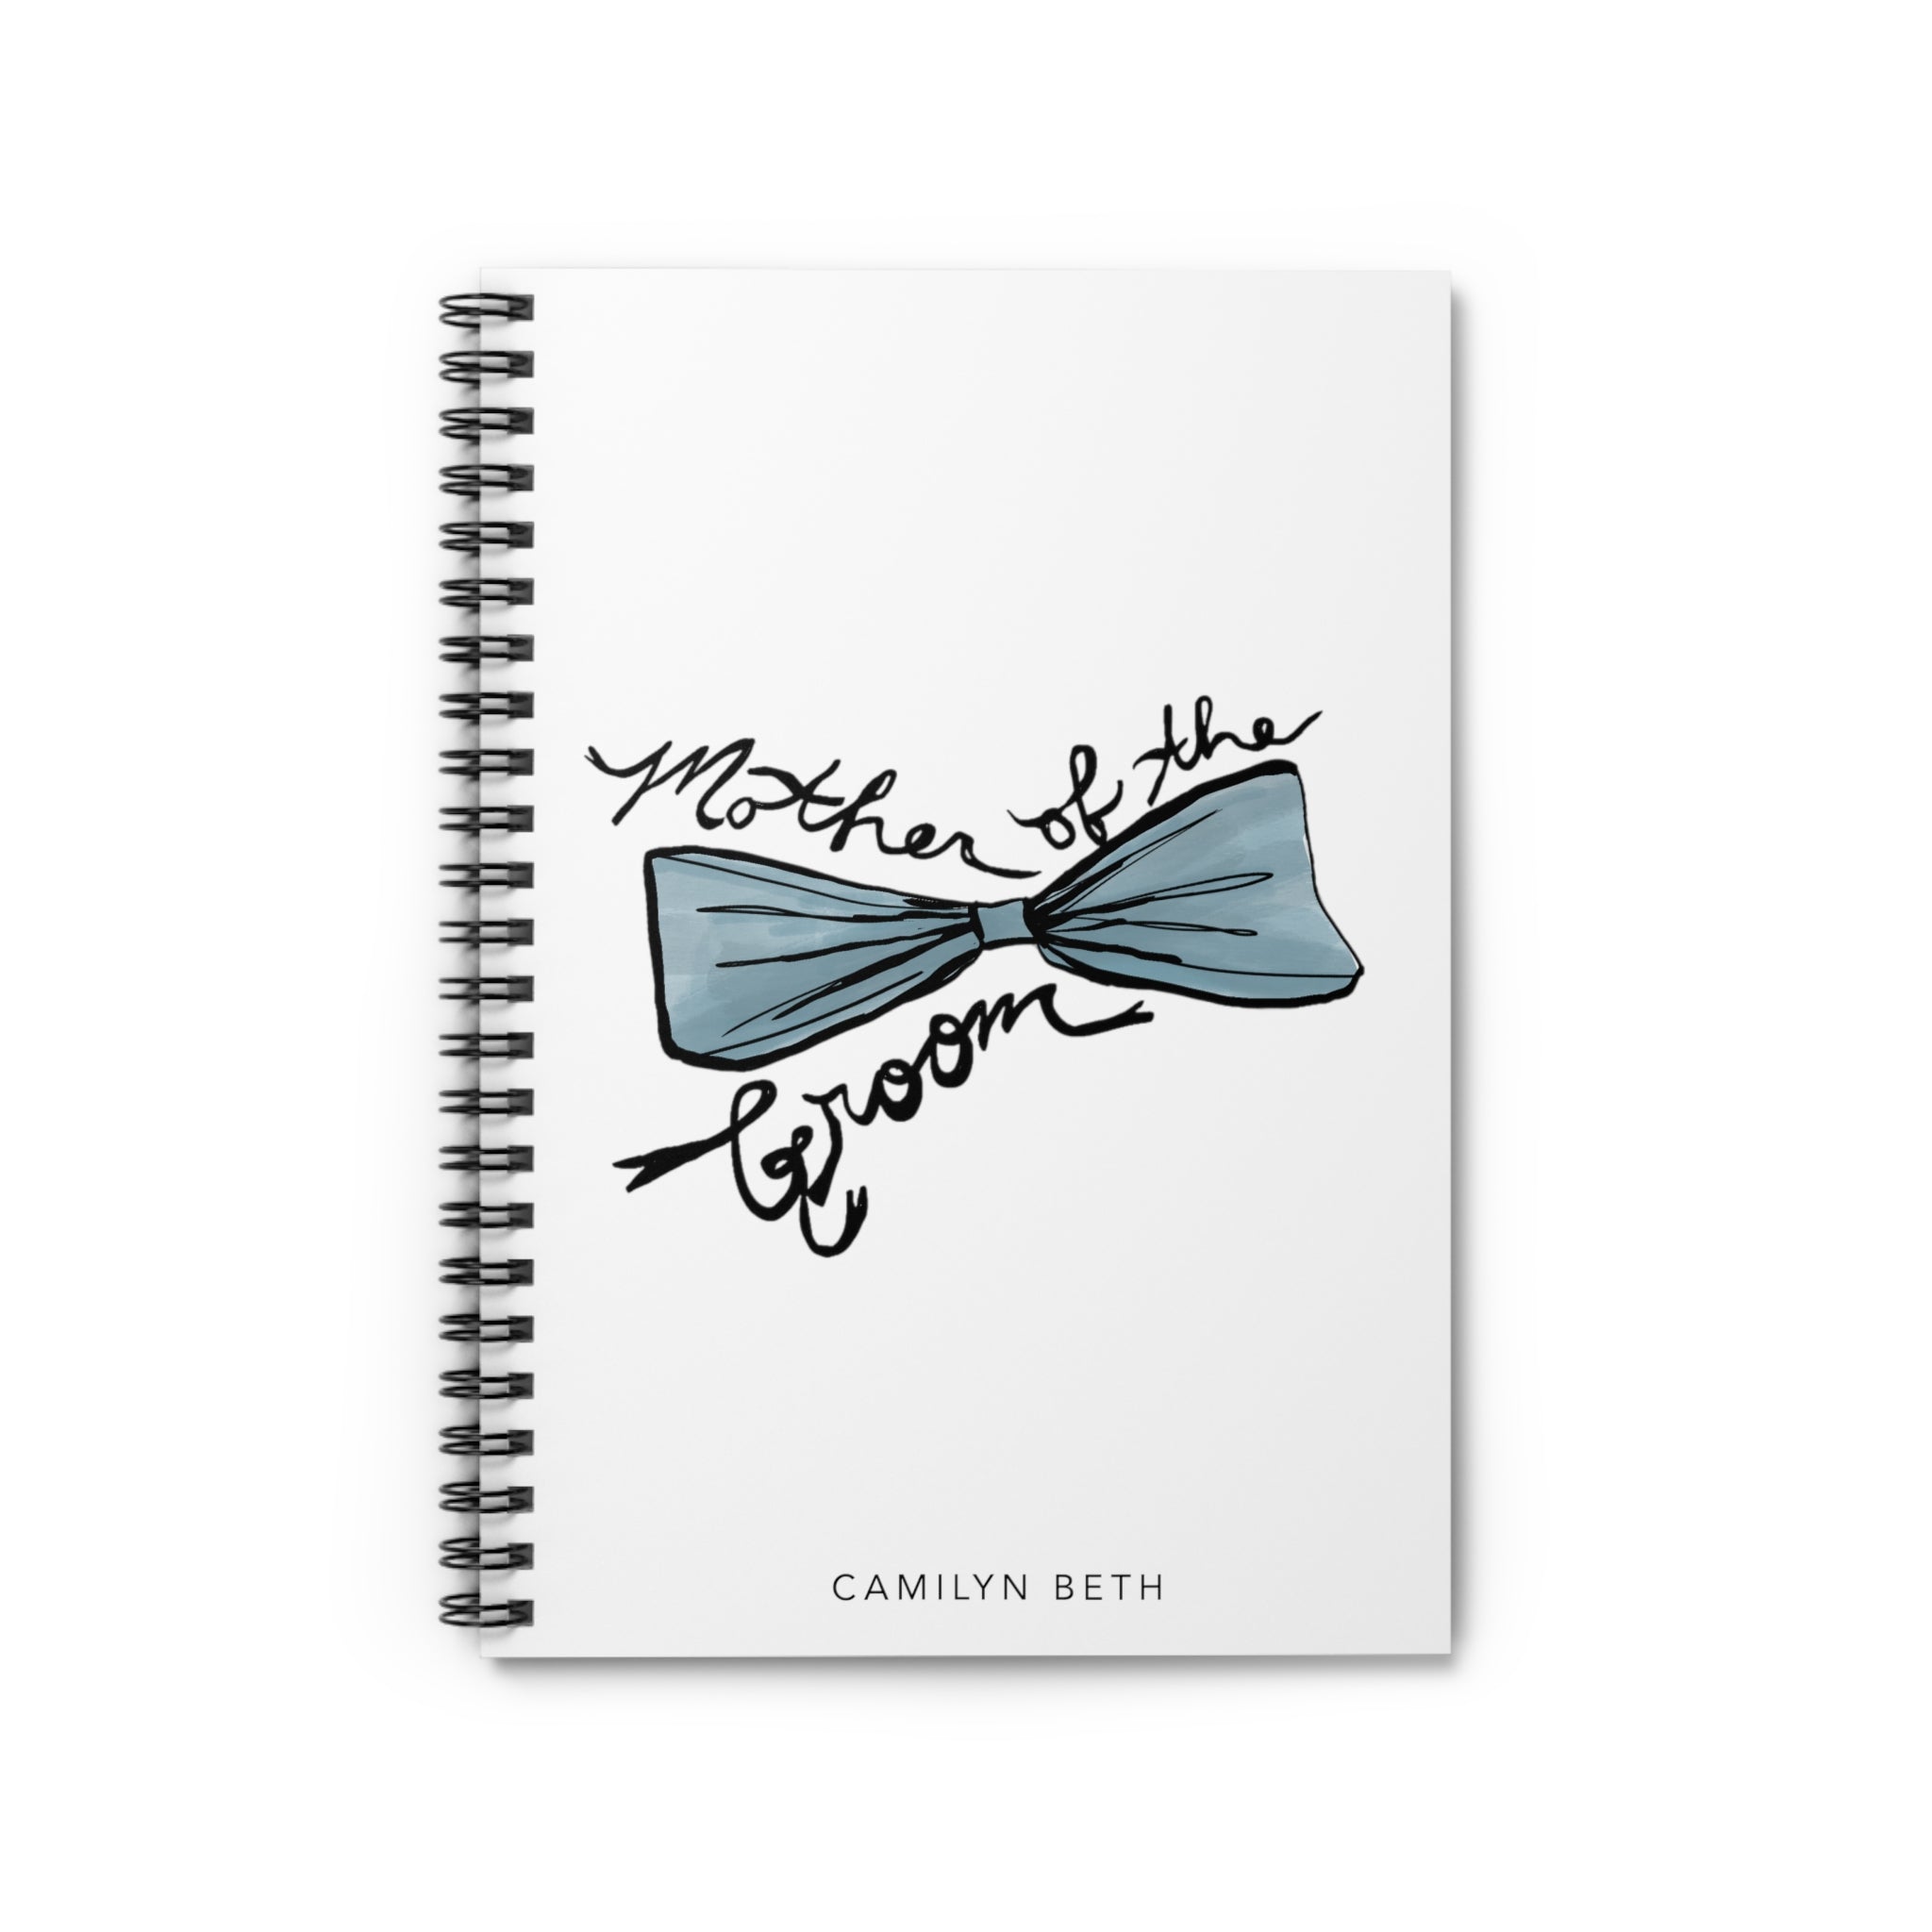 Mother of the Groom Spiral Notebook - Ruled Line